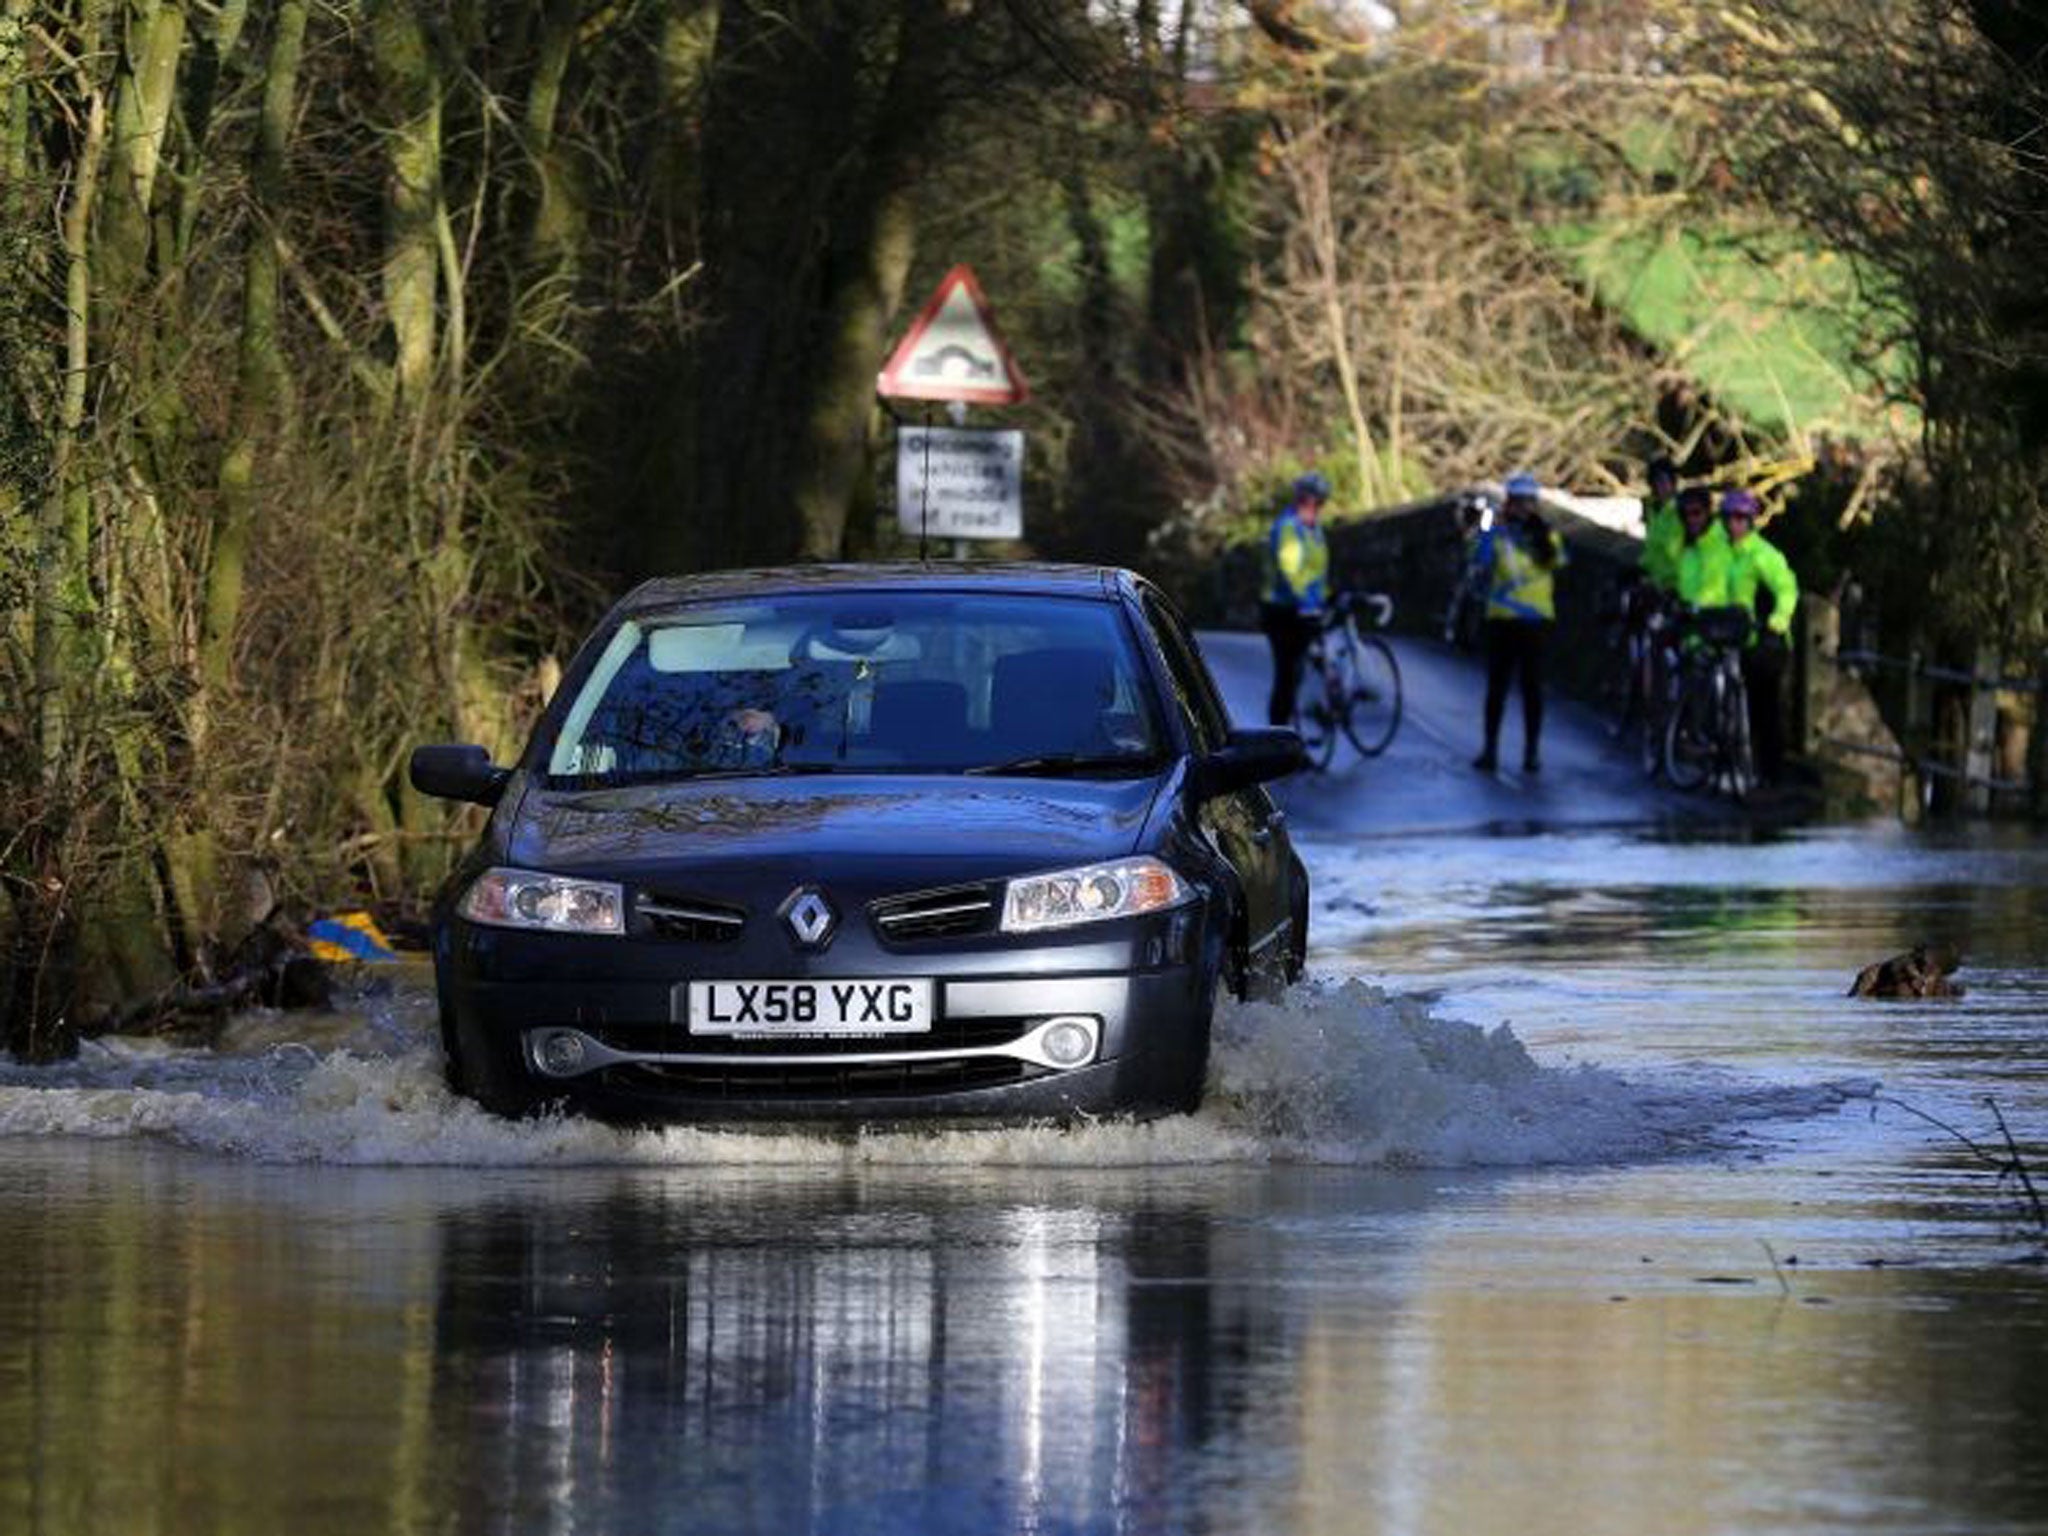 A car tackles flood waters in Kent today, as the threat of more bad weather and flooding continues across the country